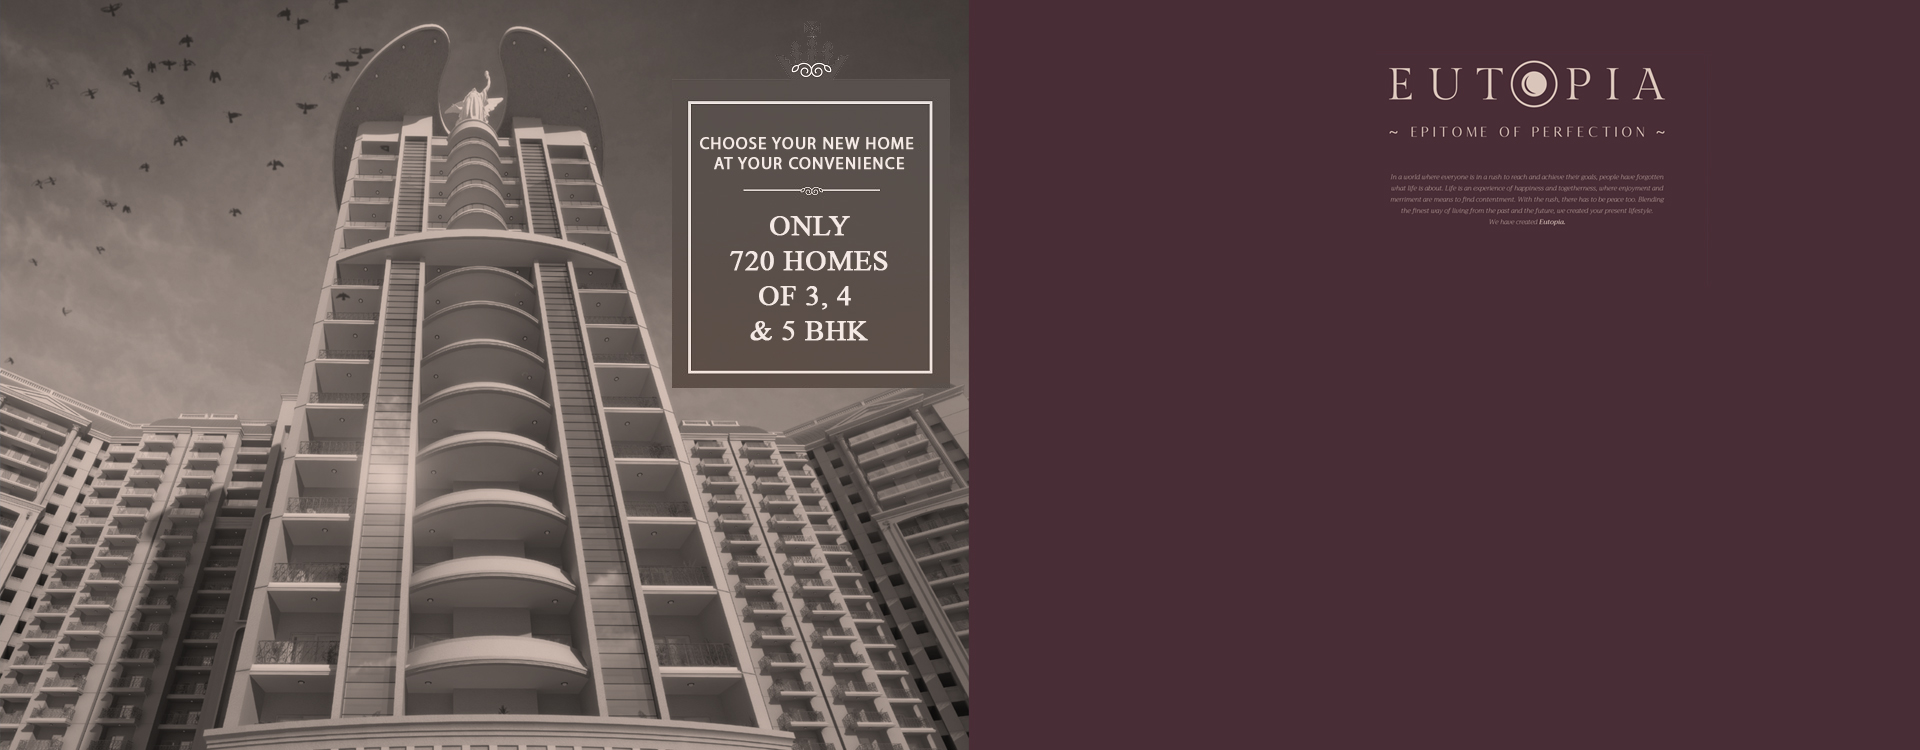 Only 720 homes of 3, 4 and 5 BHK at T and T Eutopia in Siddharth Vihar, Ghaziabad Update